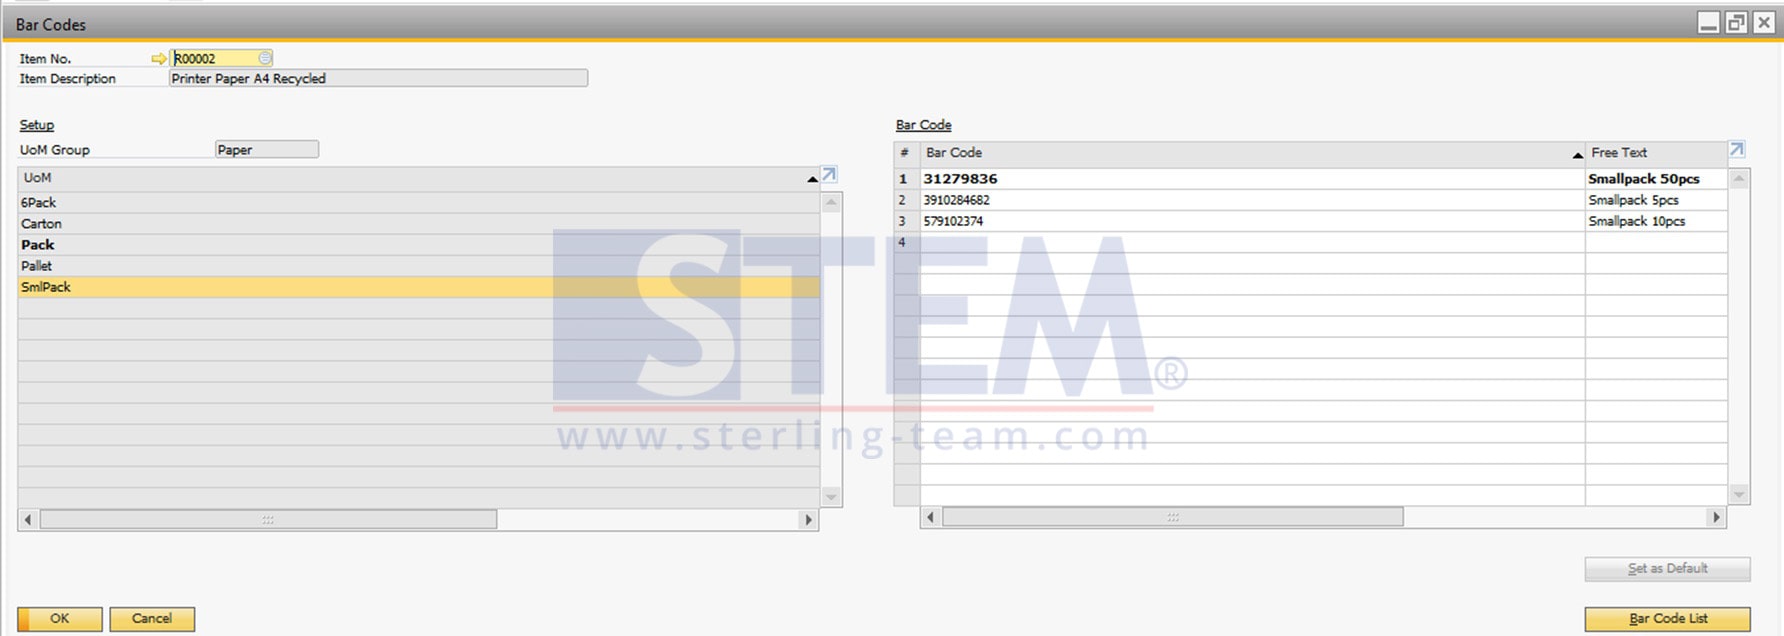 SAP_Business_One_Tips-How to Set Multiple Barcodes on One Item on SAP B1